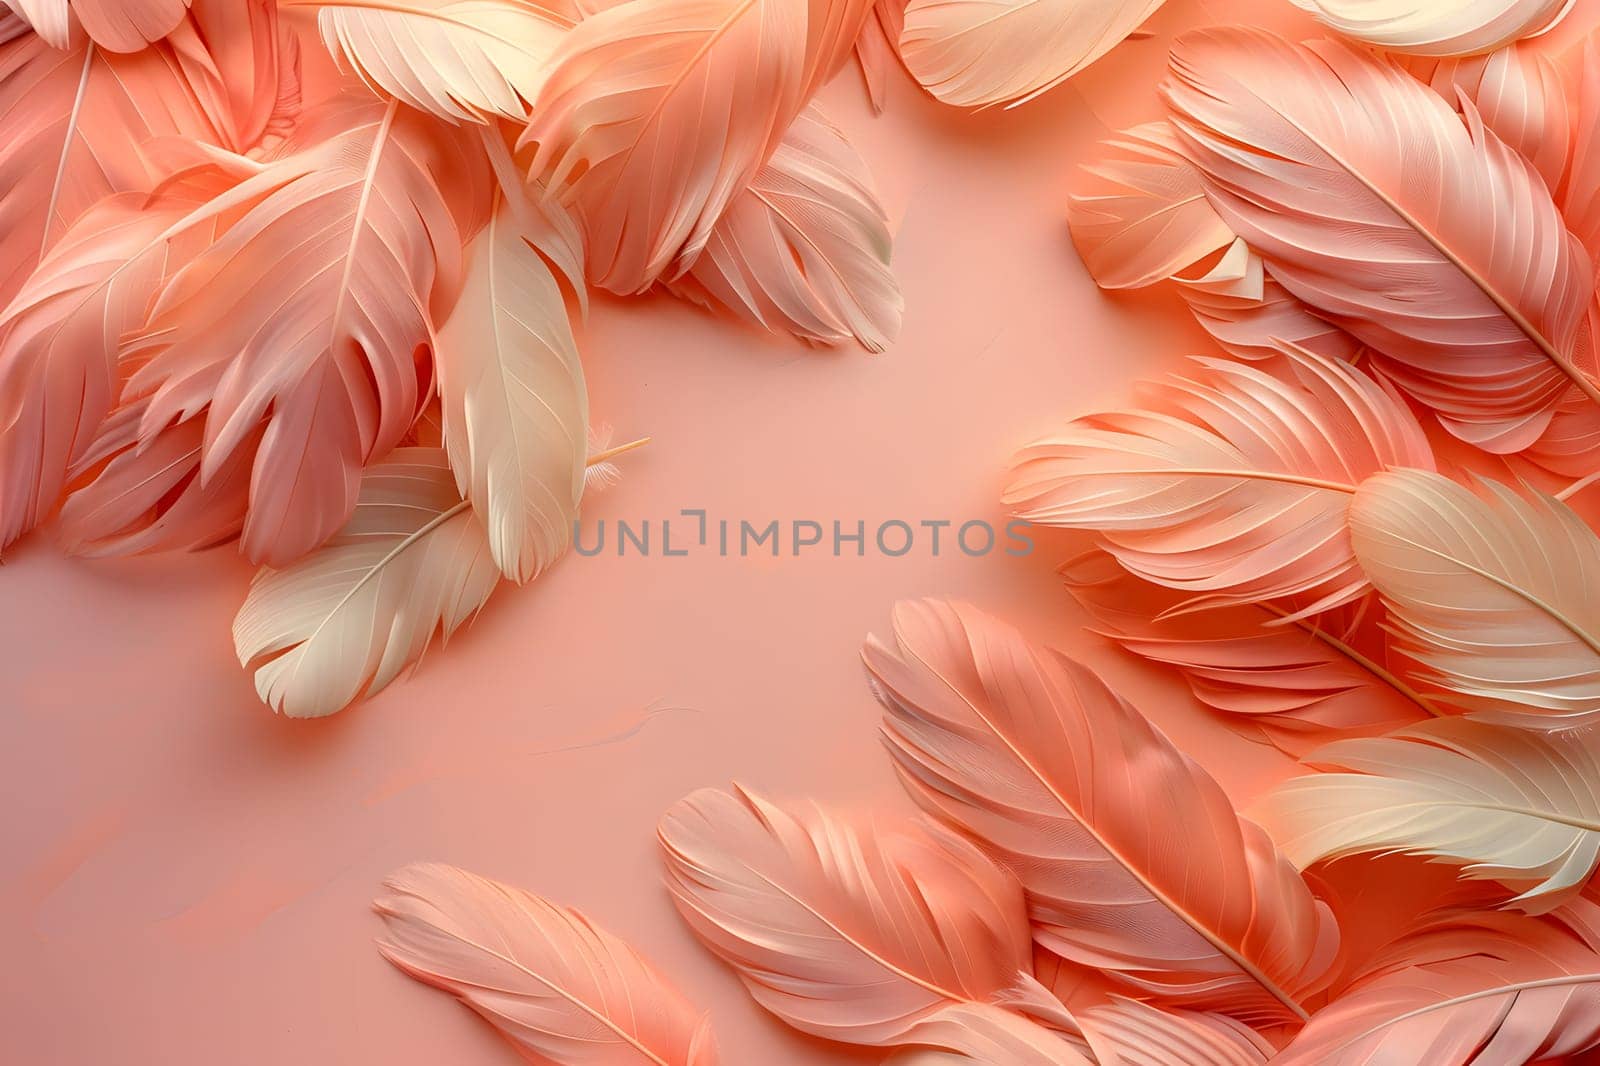 A plethora of pink feathers sit delicately on a soft pink background, resembling a flowering plant in full bloom. The natural material creates a stunning pattern of peach, magenta, and pink hues